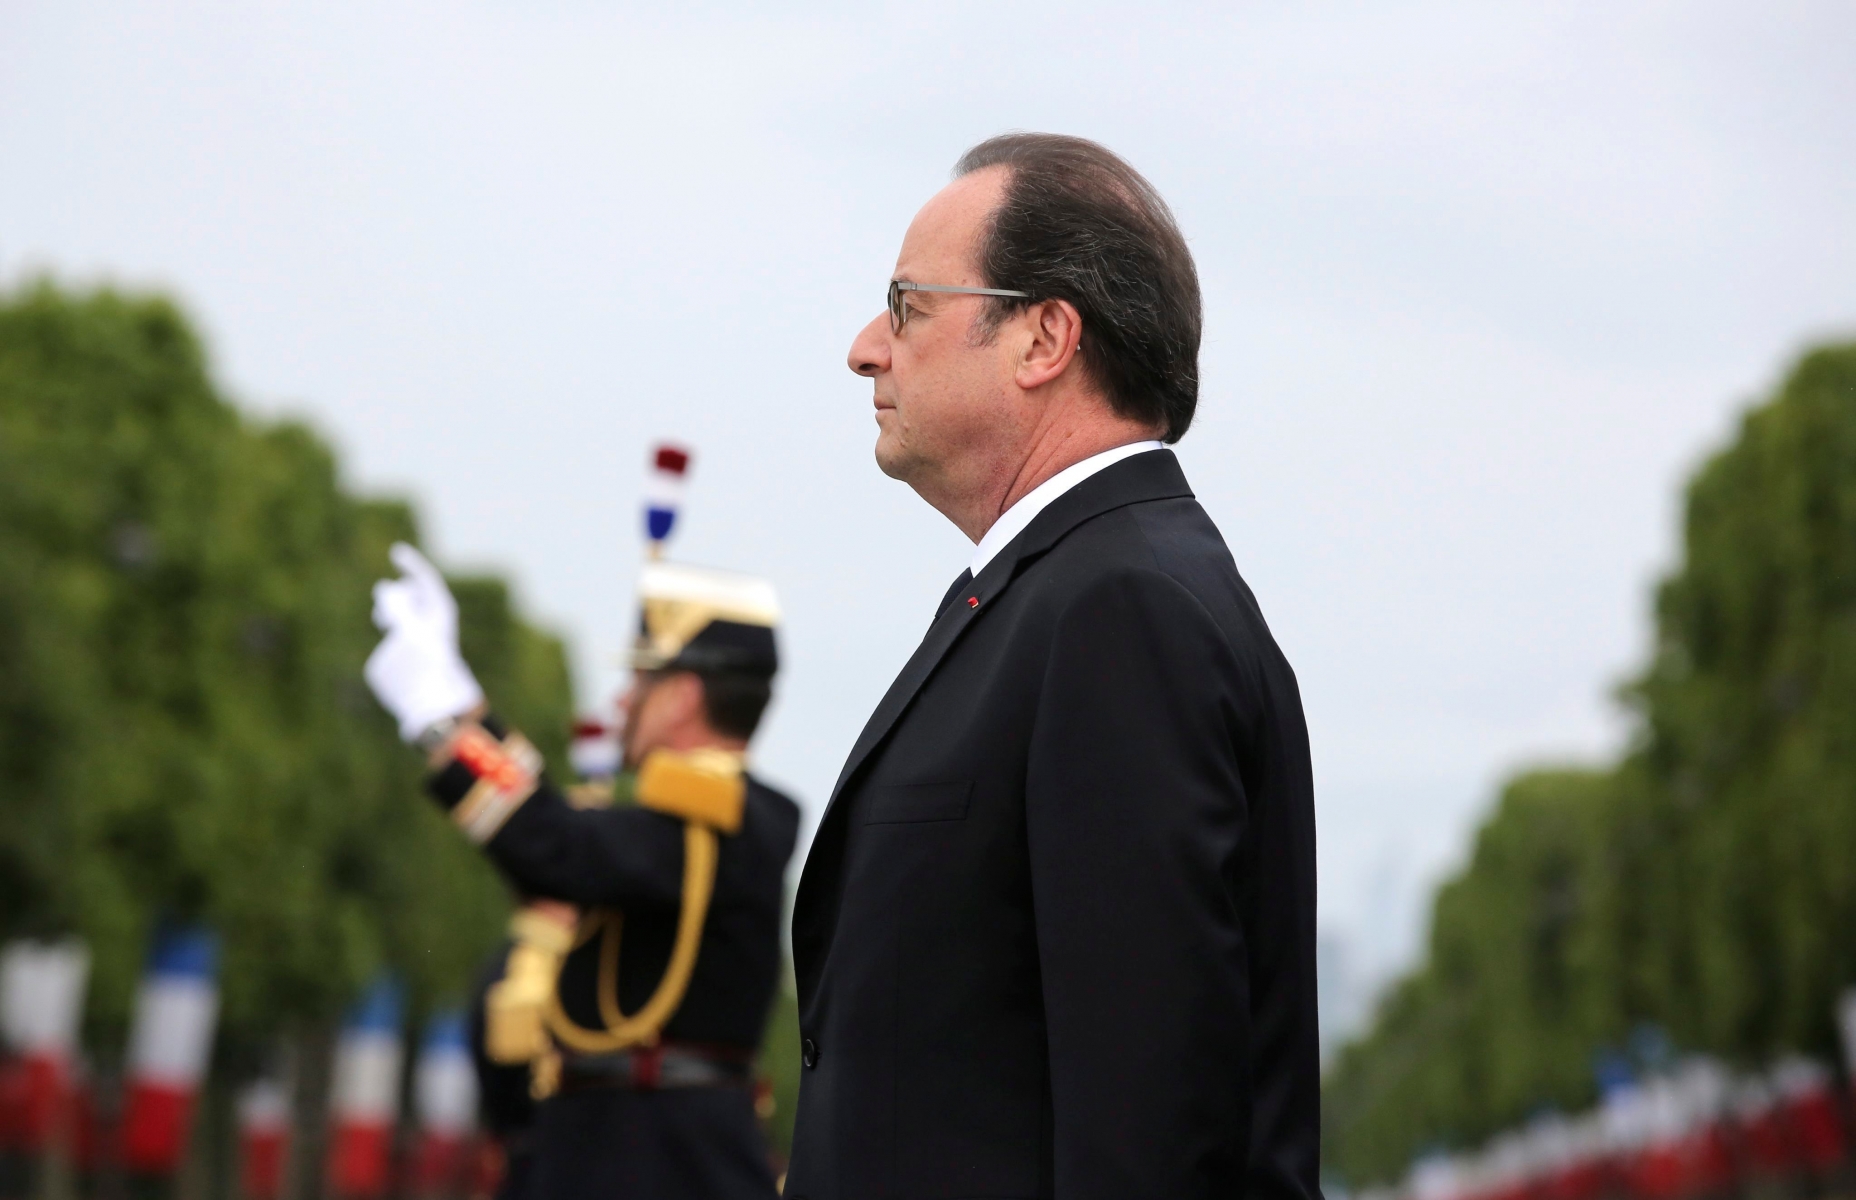 epa05424049 French President Francois Hollande reviews the troops, during the Bastille Day Parade on the Champs Elysees avenue in Paris, France, 14 July 2016. France holds annual Bastille Day military parade with troops from Australia and New Zealand as special guests among the 3,000 soldiers who will march up the Champs Elysees avenue. They will be accompanied by 200 vehicles with 85 aircraft flying overhead.  EPA/THIBAULT CAMUS / POOL MAXPPP OUT FRANCE BASTILLE DAY MILITARY PARADE